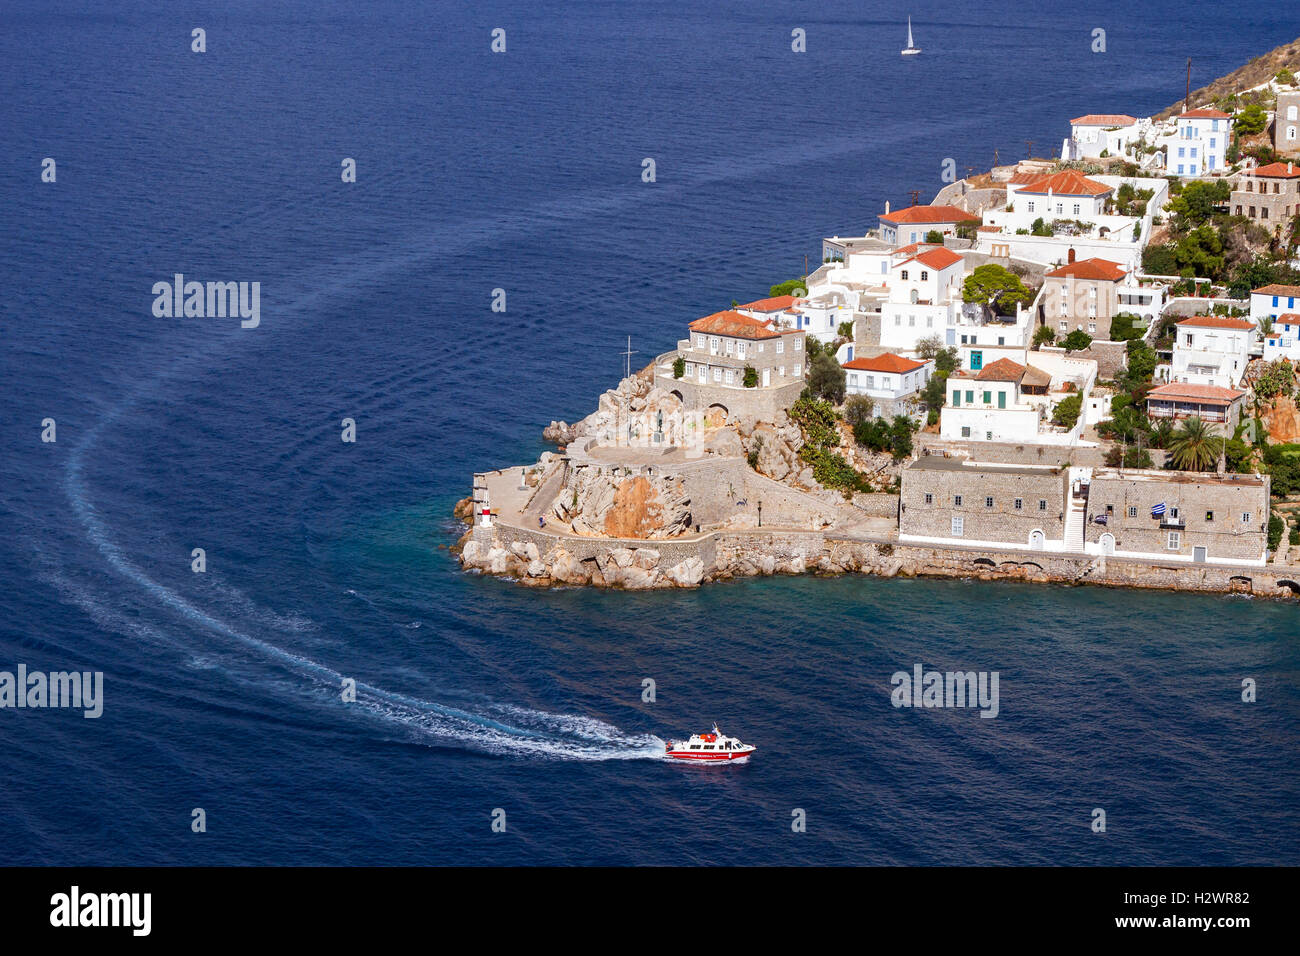 A sea taxi is just entering the port of Hydra island, in Argosaronic Gulf, near Athens, Greece. Stock Photo